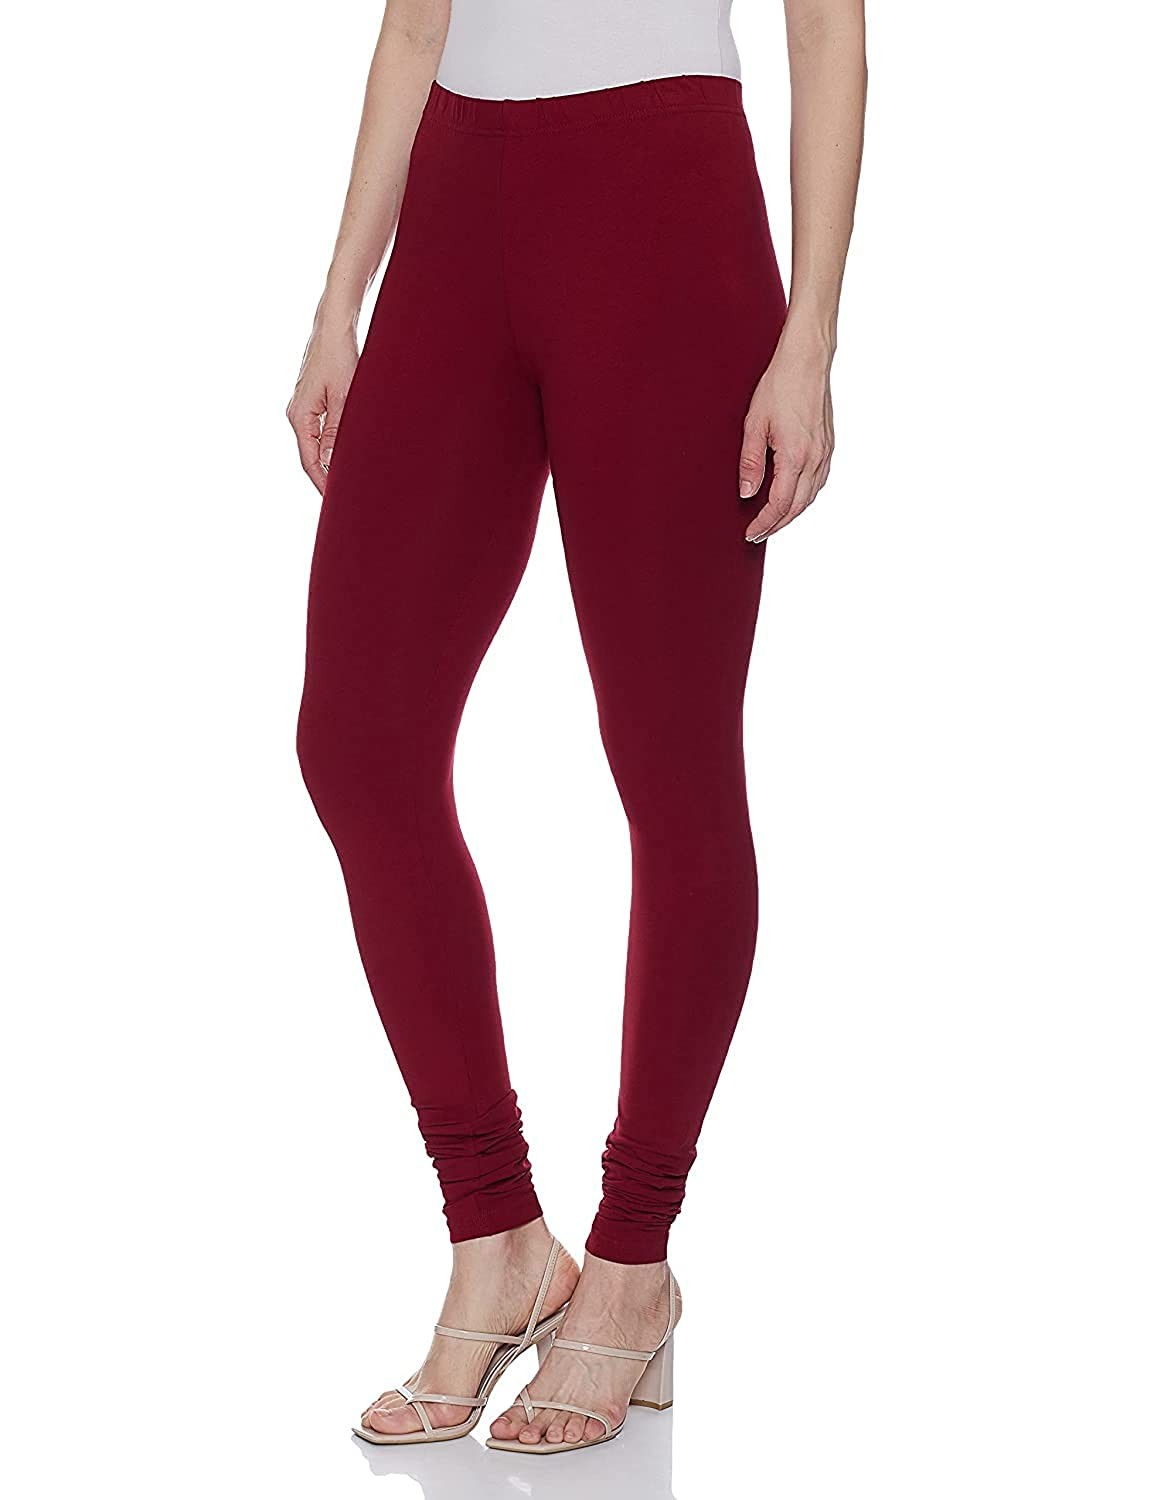 MM Style- Women's 4-Way Stretch Leggings for Every Occasion (Maroon)